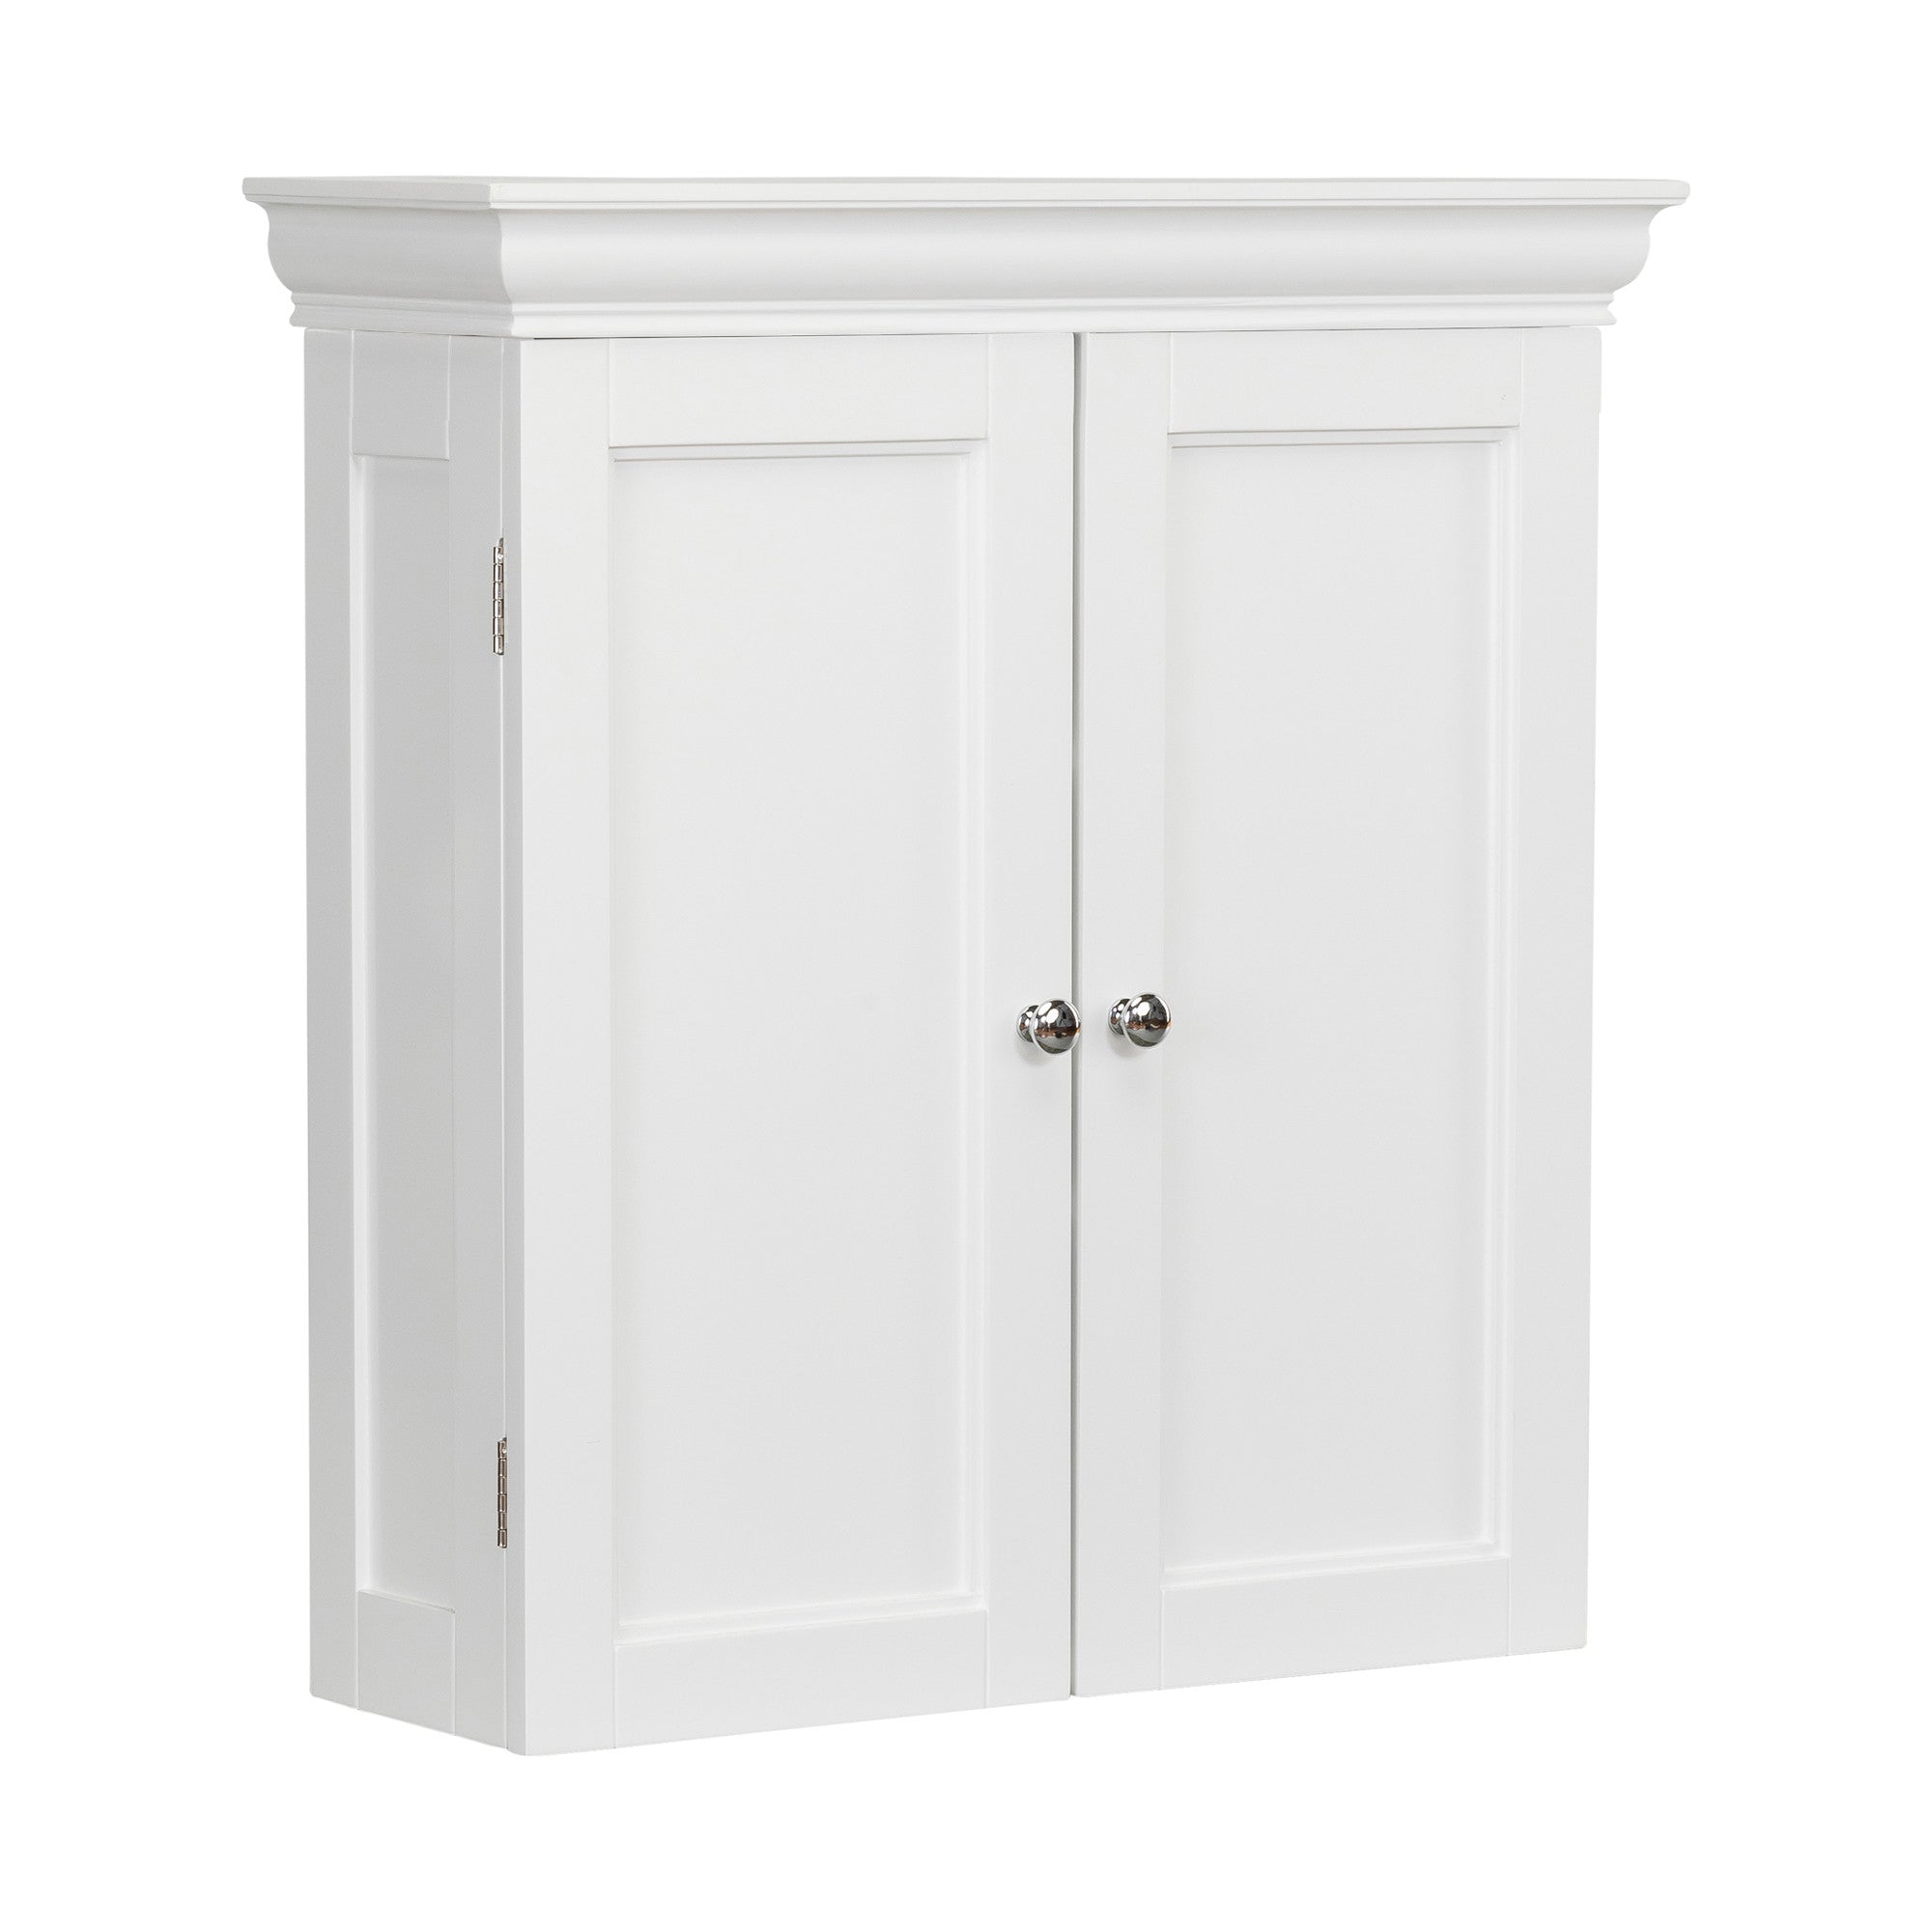 Elegant Home Fashions Stratford Removable Wall Cabinet 2 Doors